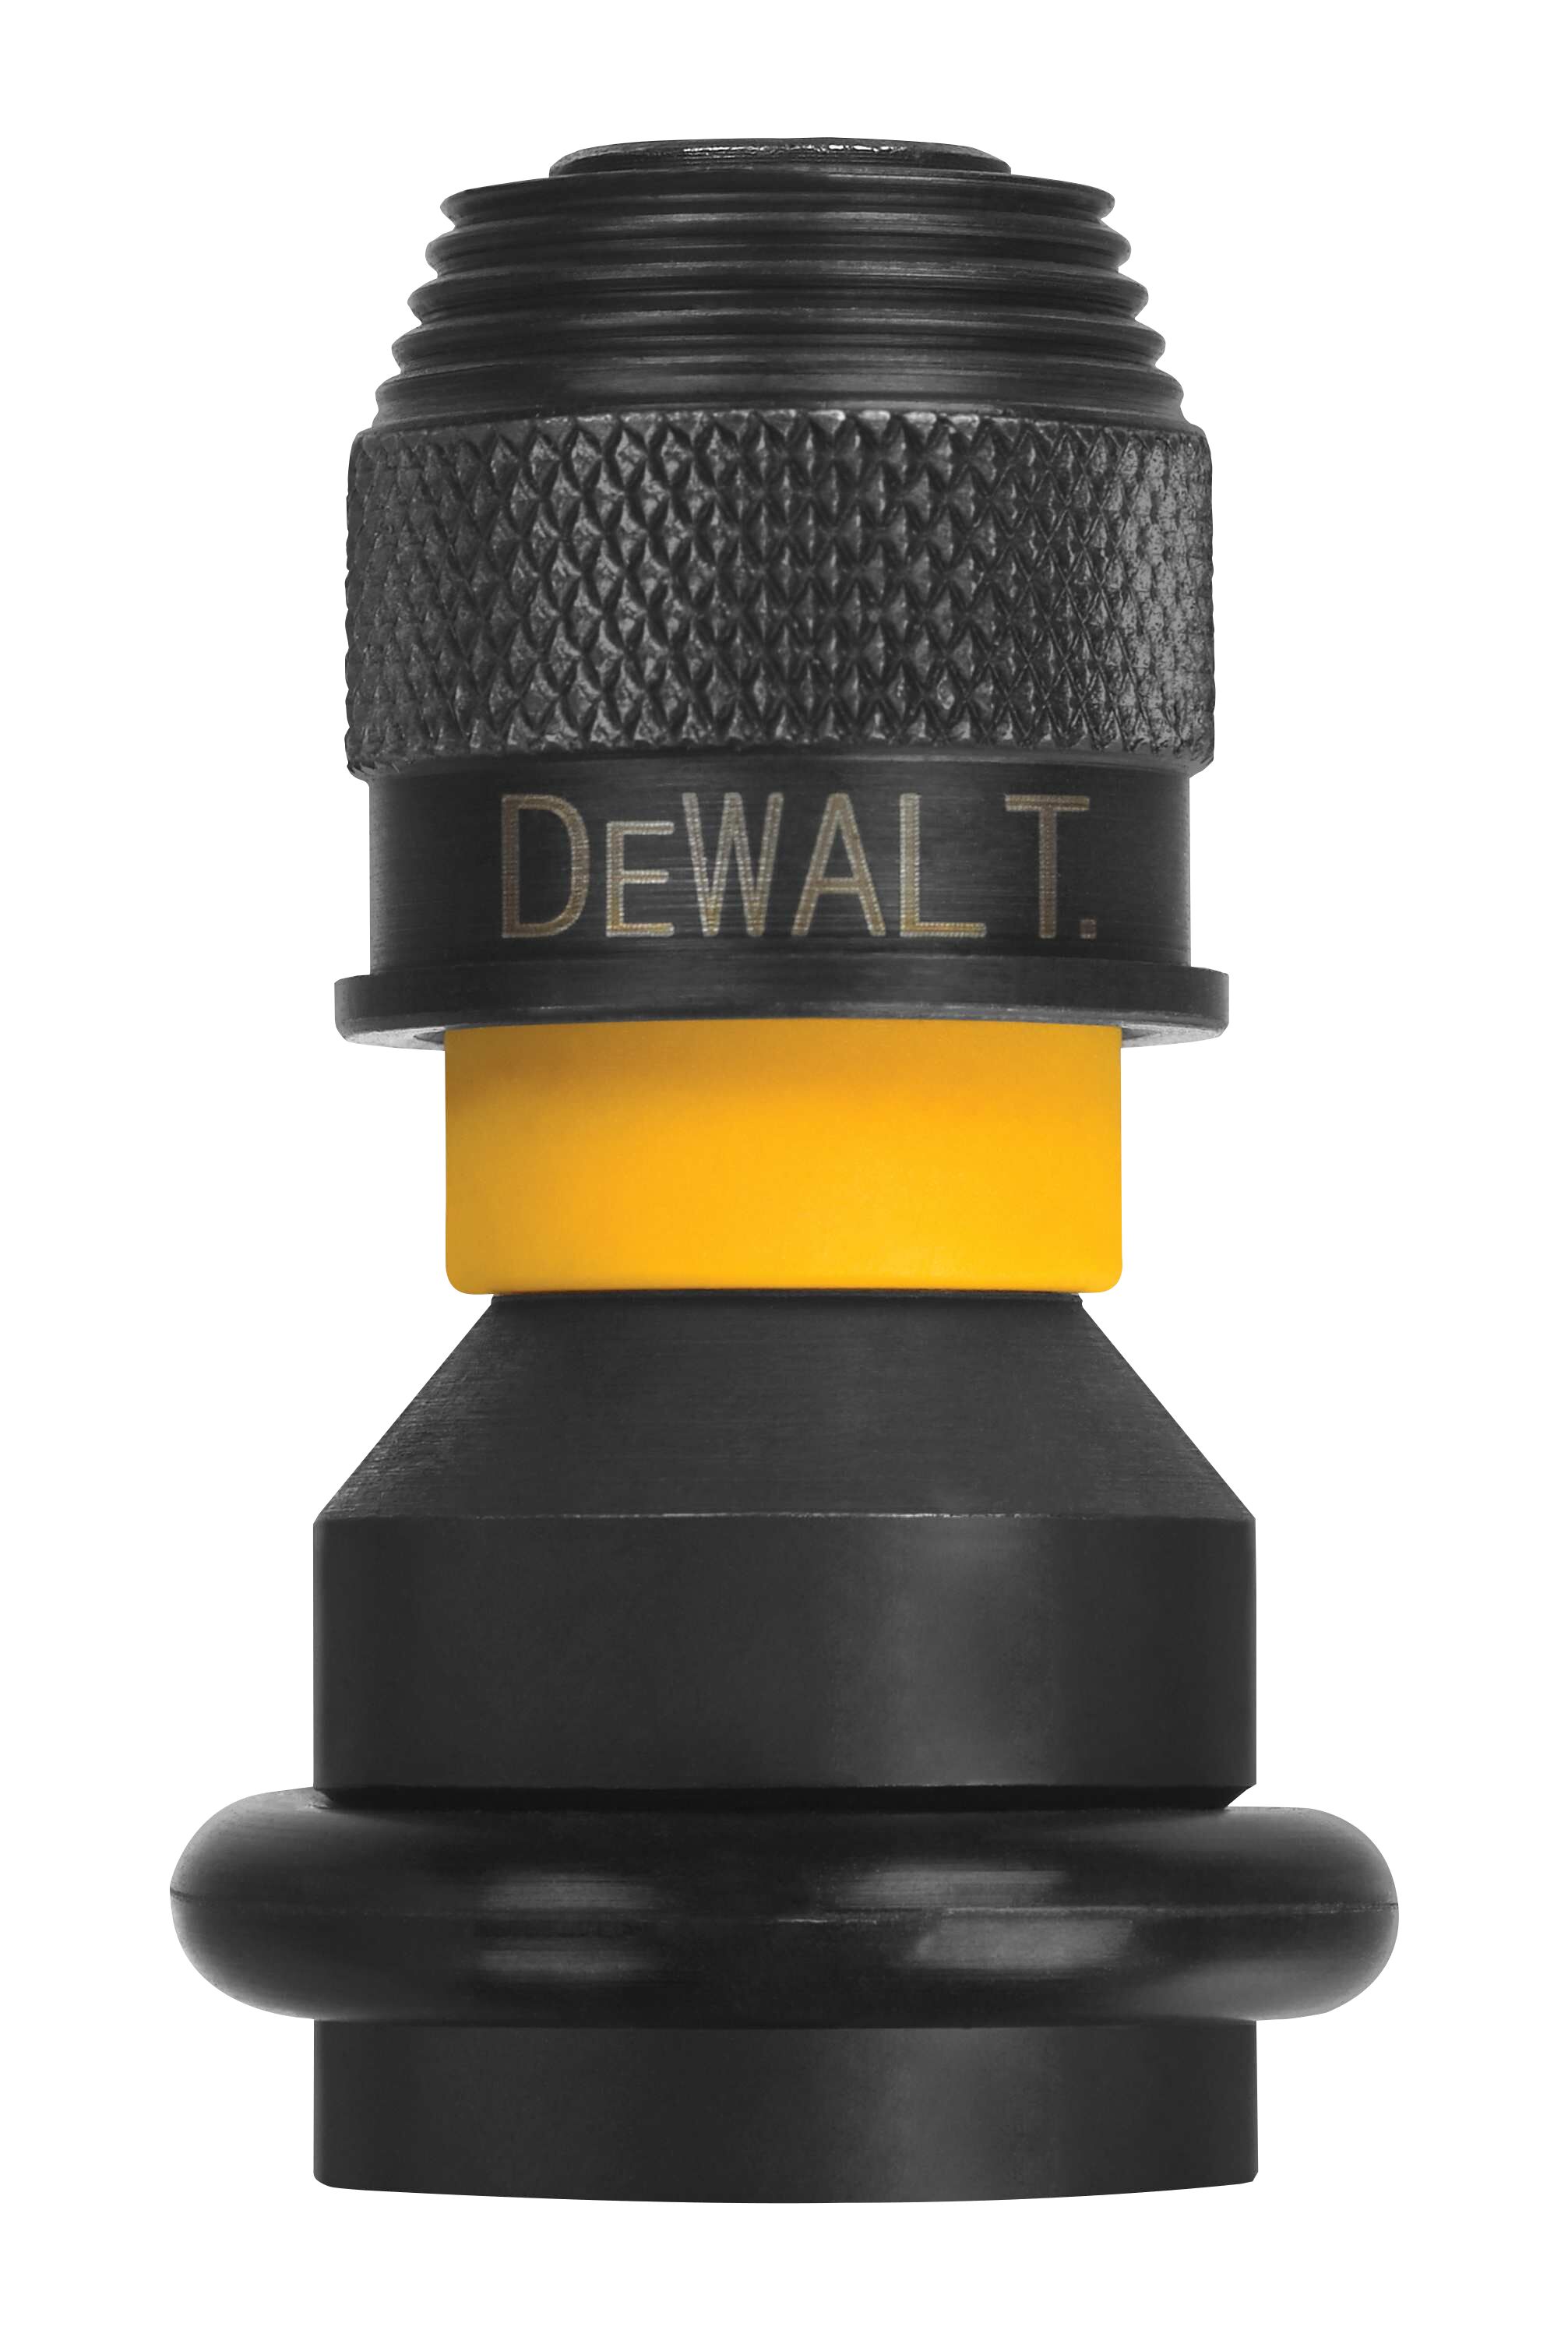 DEWALT Impact Extreme Wrench Adaptor 1/2" SQ To 1/4" Hex